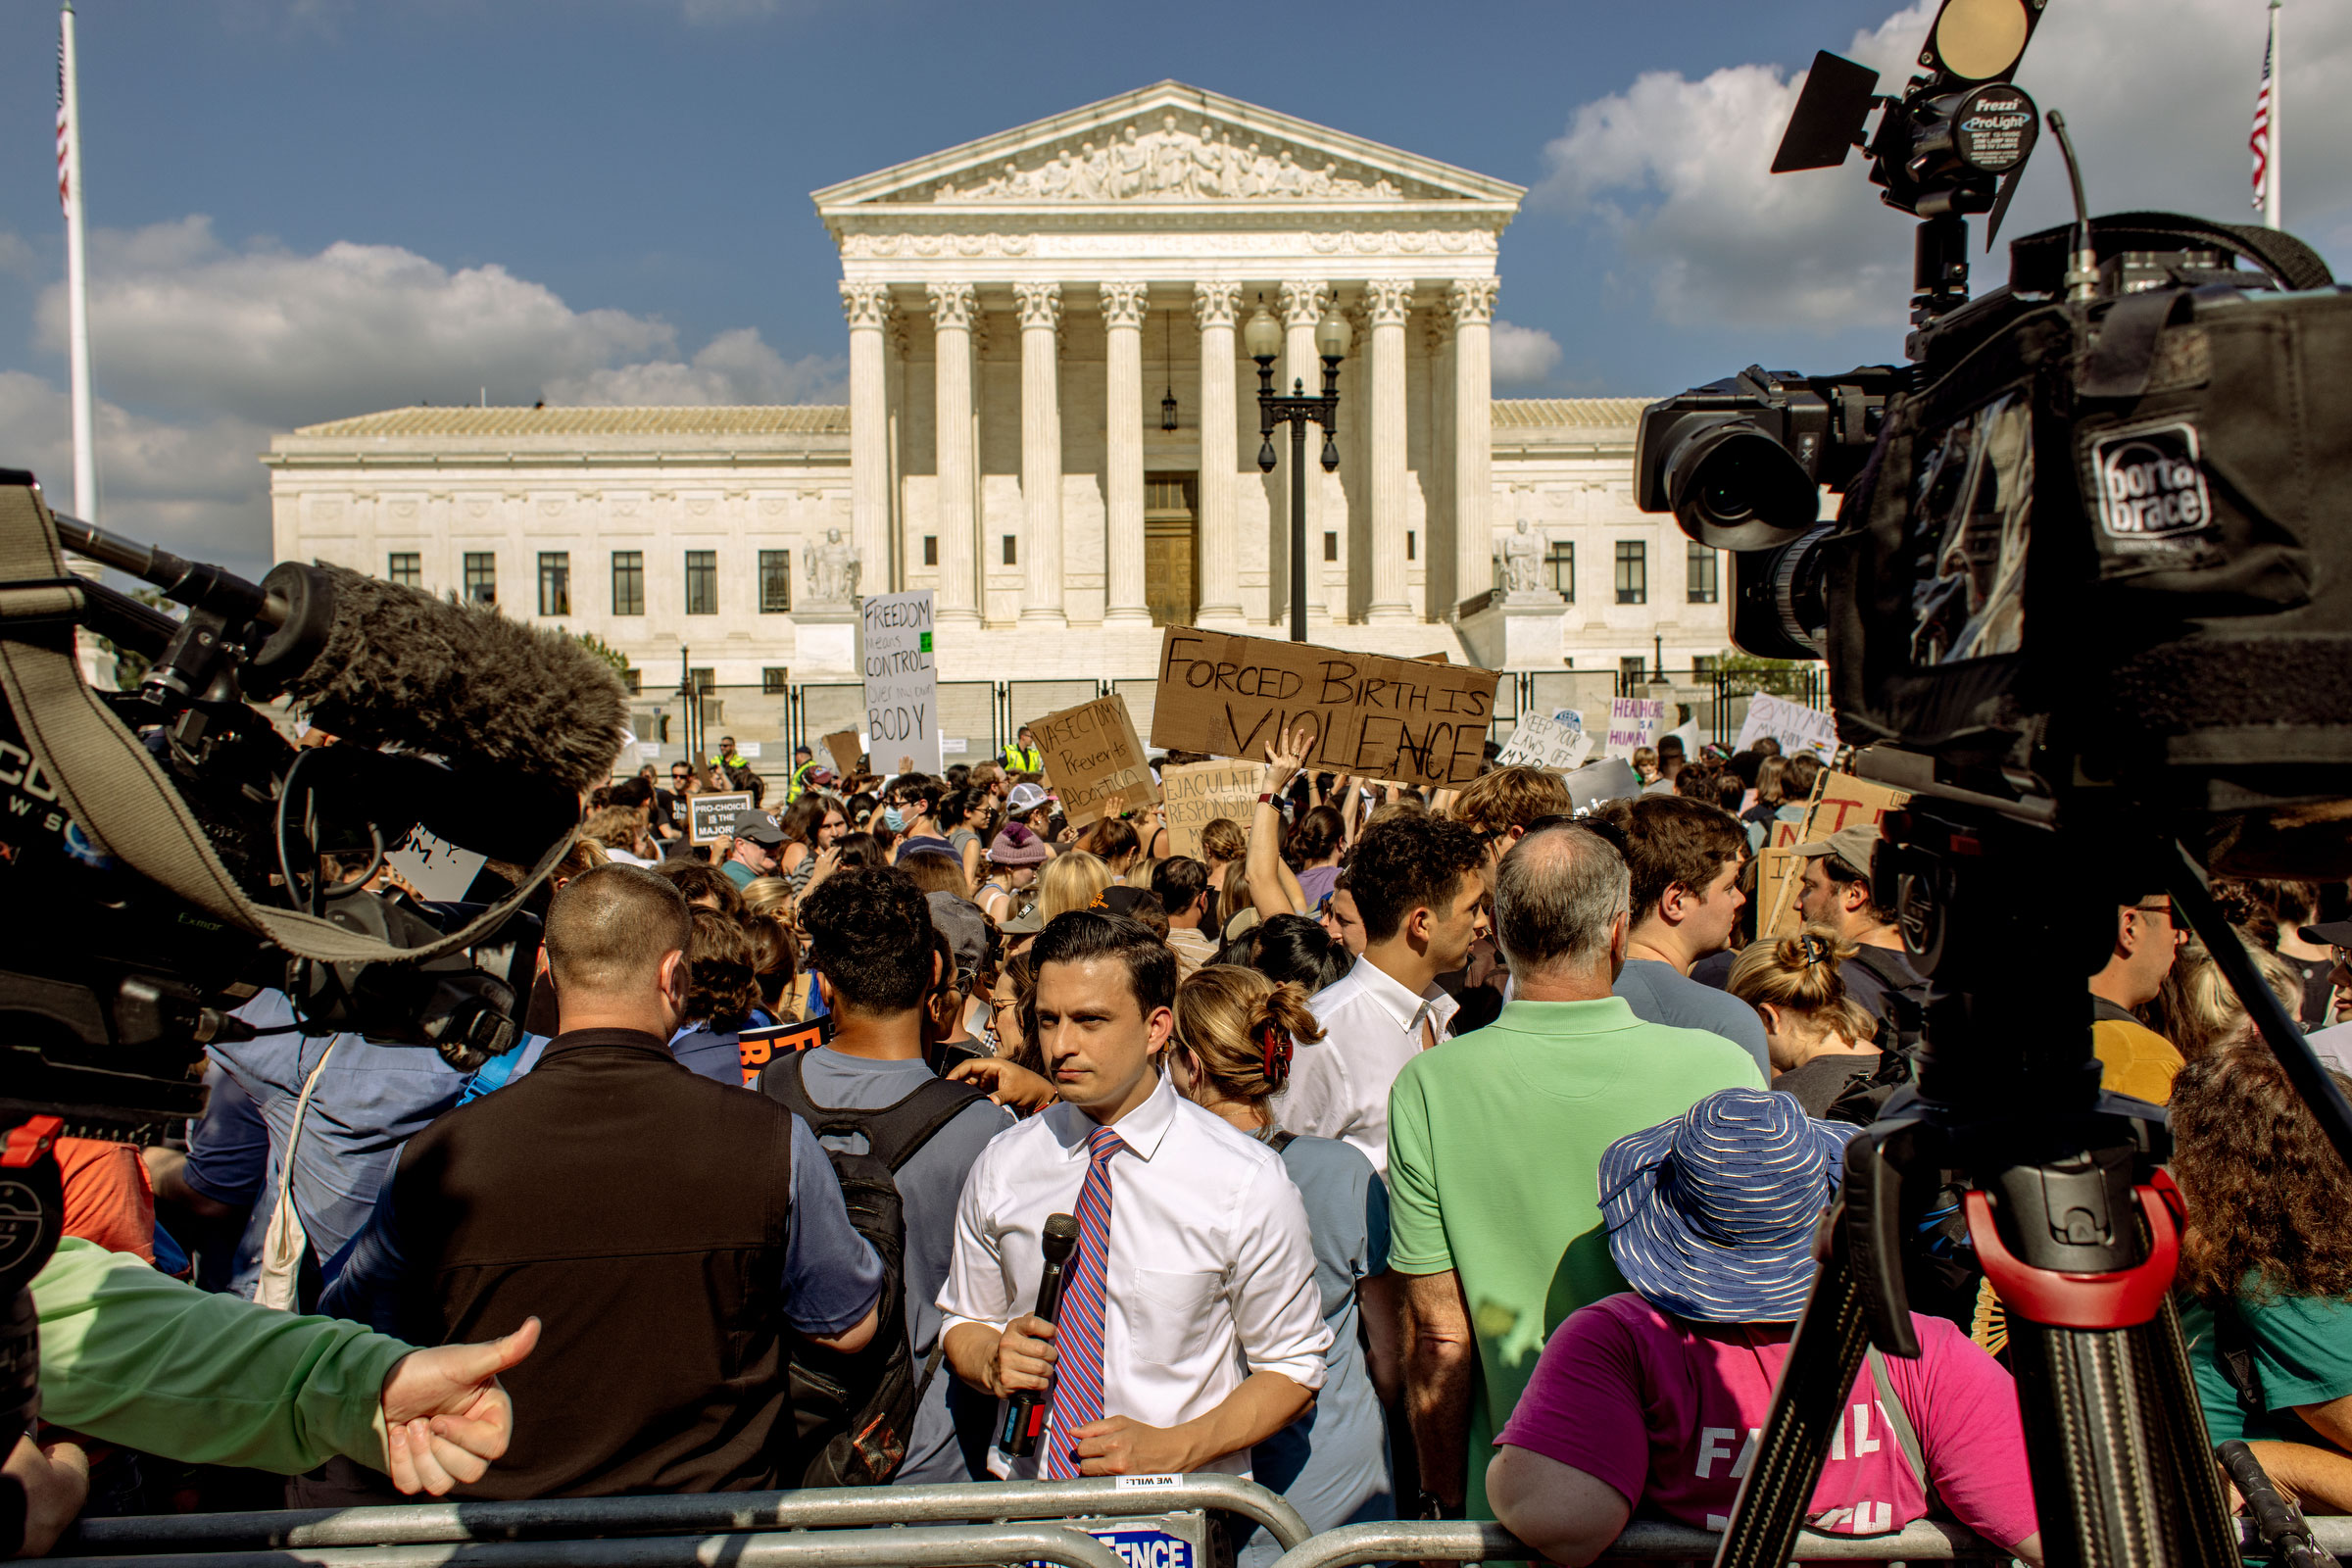 The scene in front of the Supreme Court on June 24, 2022 in Washington, D.C. (Jason Andrew for TIME)